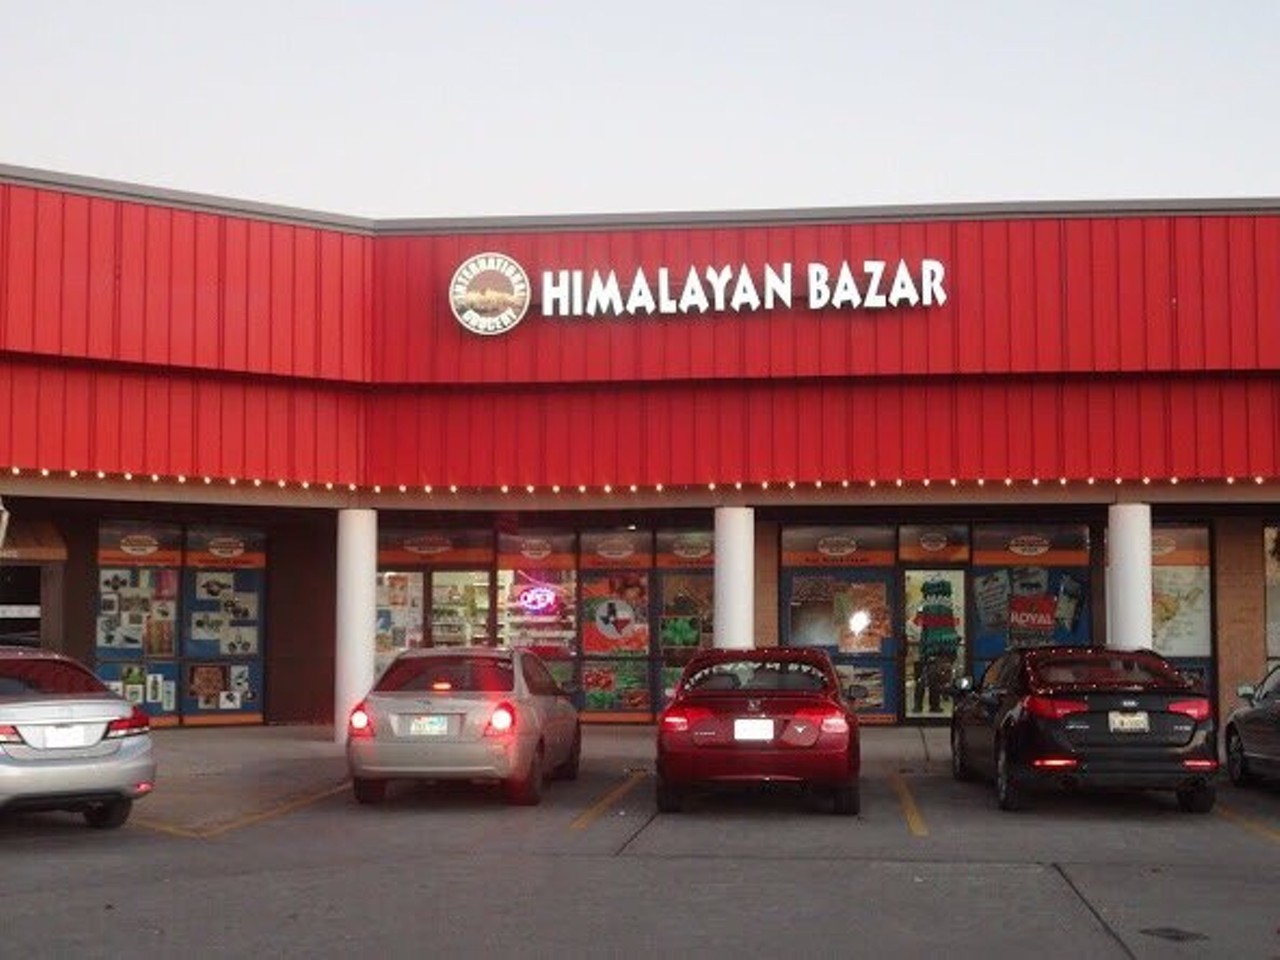 Himalayan Bazar
8466 Fredericksburg Rd,  (210) 614-8600, Mon.-Sun.:10am-10pm With its expertise in Indian and Nepalese foods, Himalayan Bazar sells a variety of dried goods, vegetables, including an extensive frozen foods section and a section for non-edible goods like incense holders.
Yelp/Himalayan Bazar